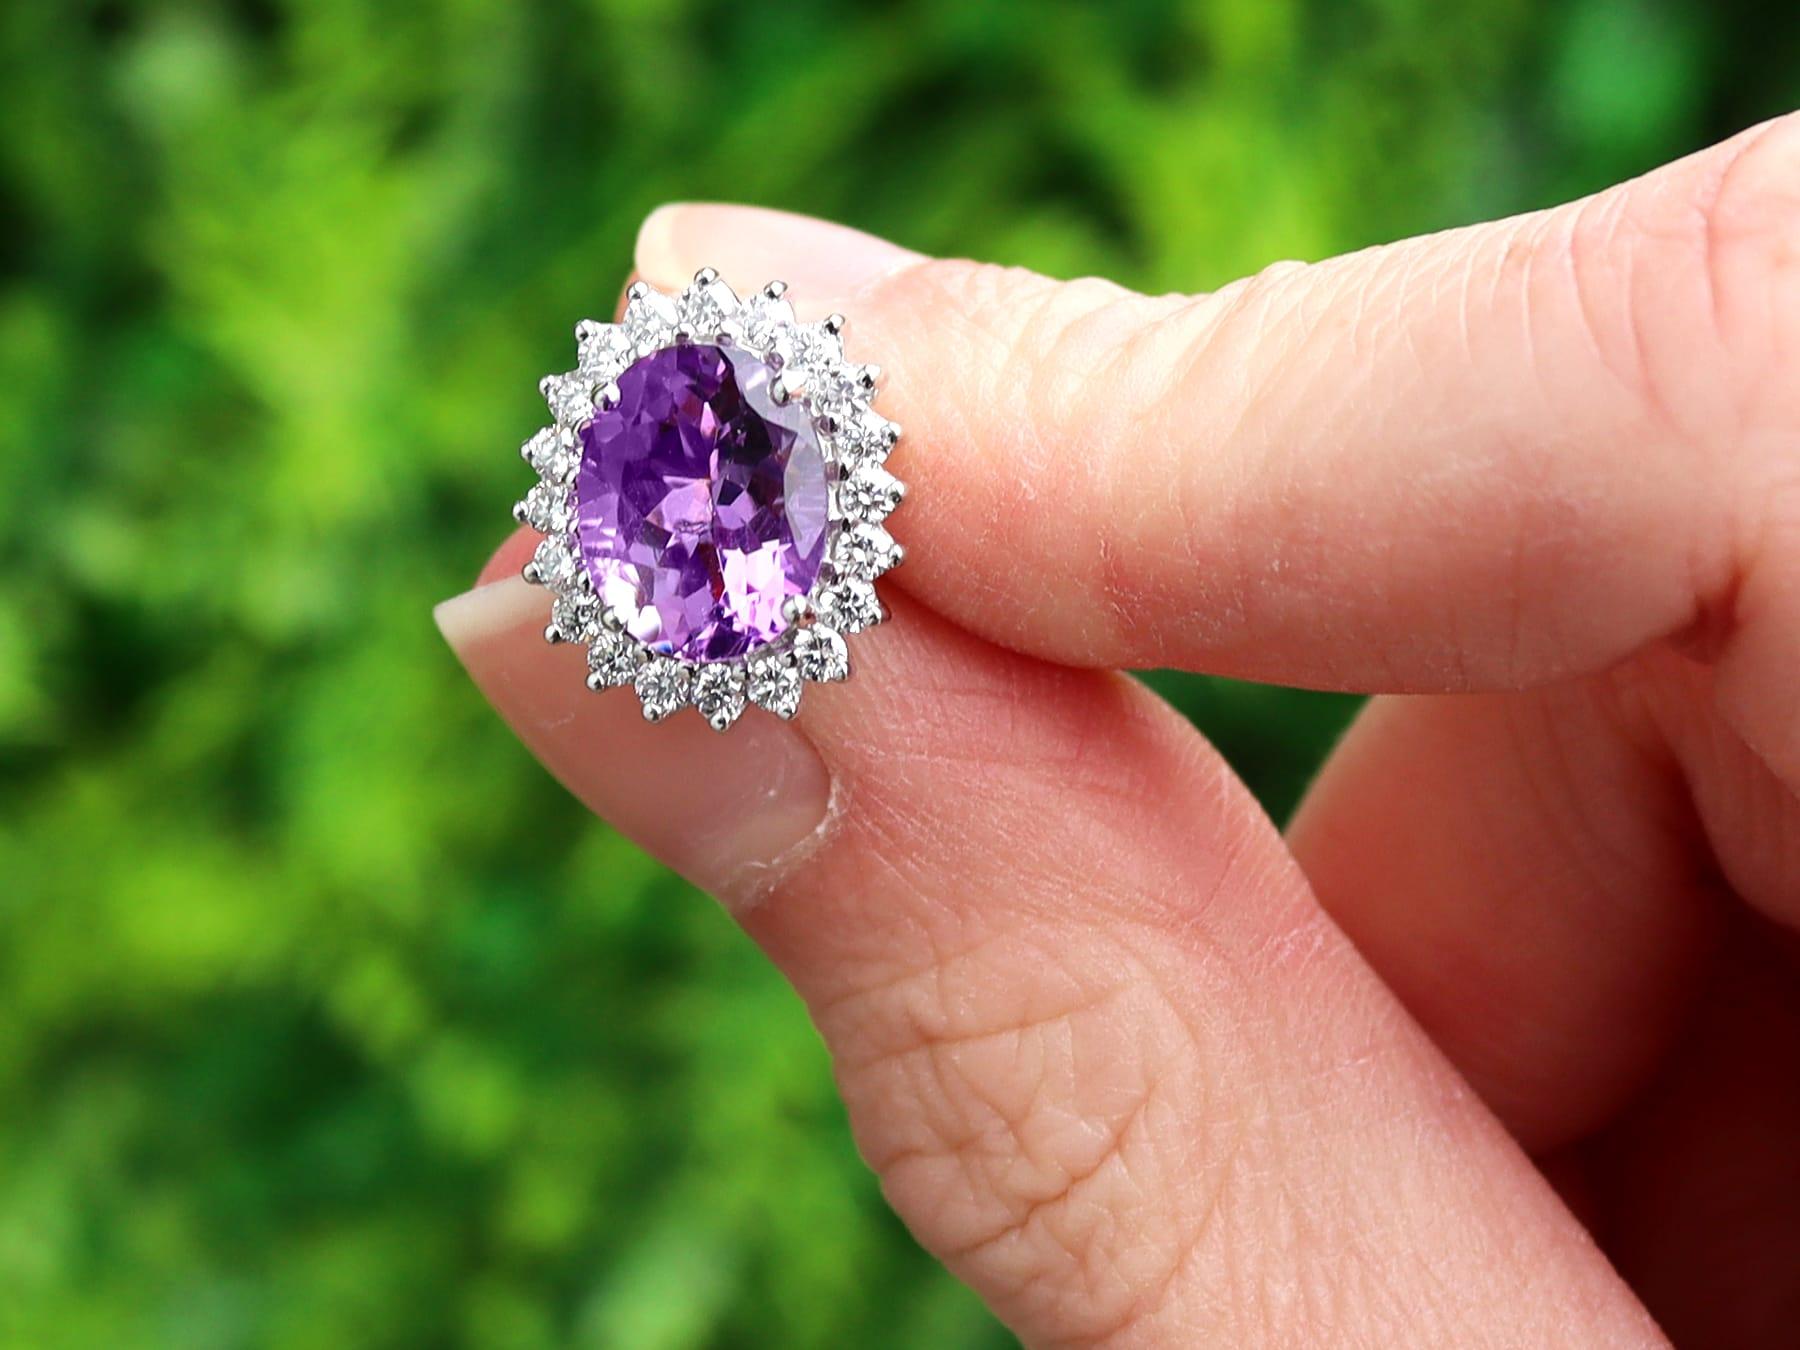 A stunning, fine and impressive pair of vintage 3.50 carat amethyst and 0.80 carat diamond, 9 carat white gold cluster earrings; part of our diverse gemstone jewellery collections

These stunning, fine and impressive vintage amethyst earrings have